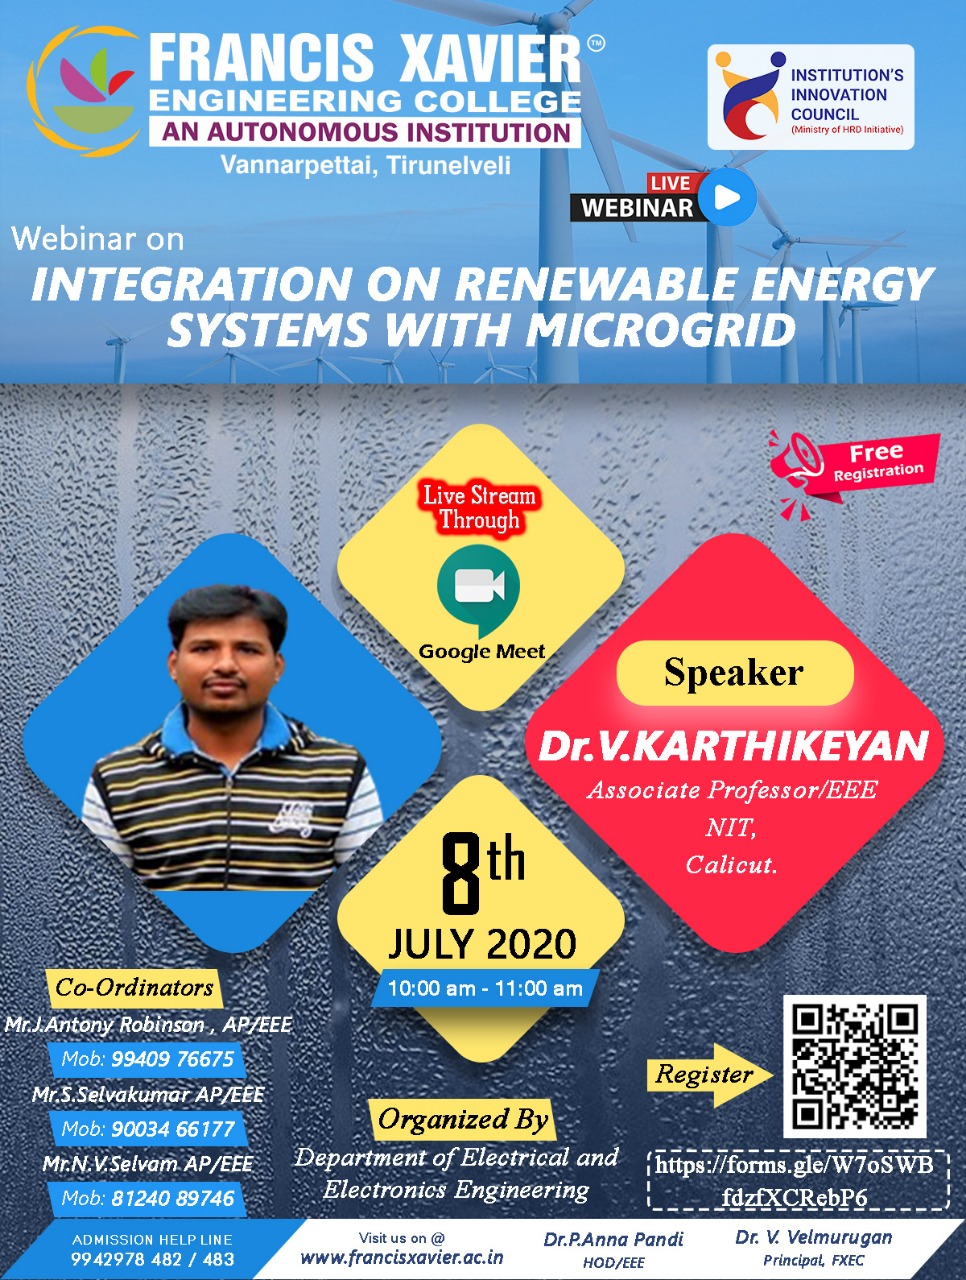 Webinar on INTEGRATION ON RENEWABLE ENERGY SYSTEMS WITH MICROGRID